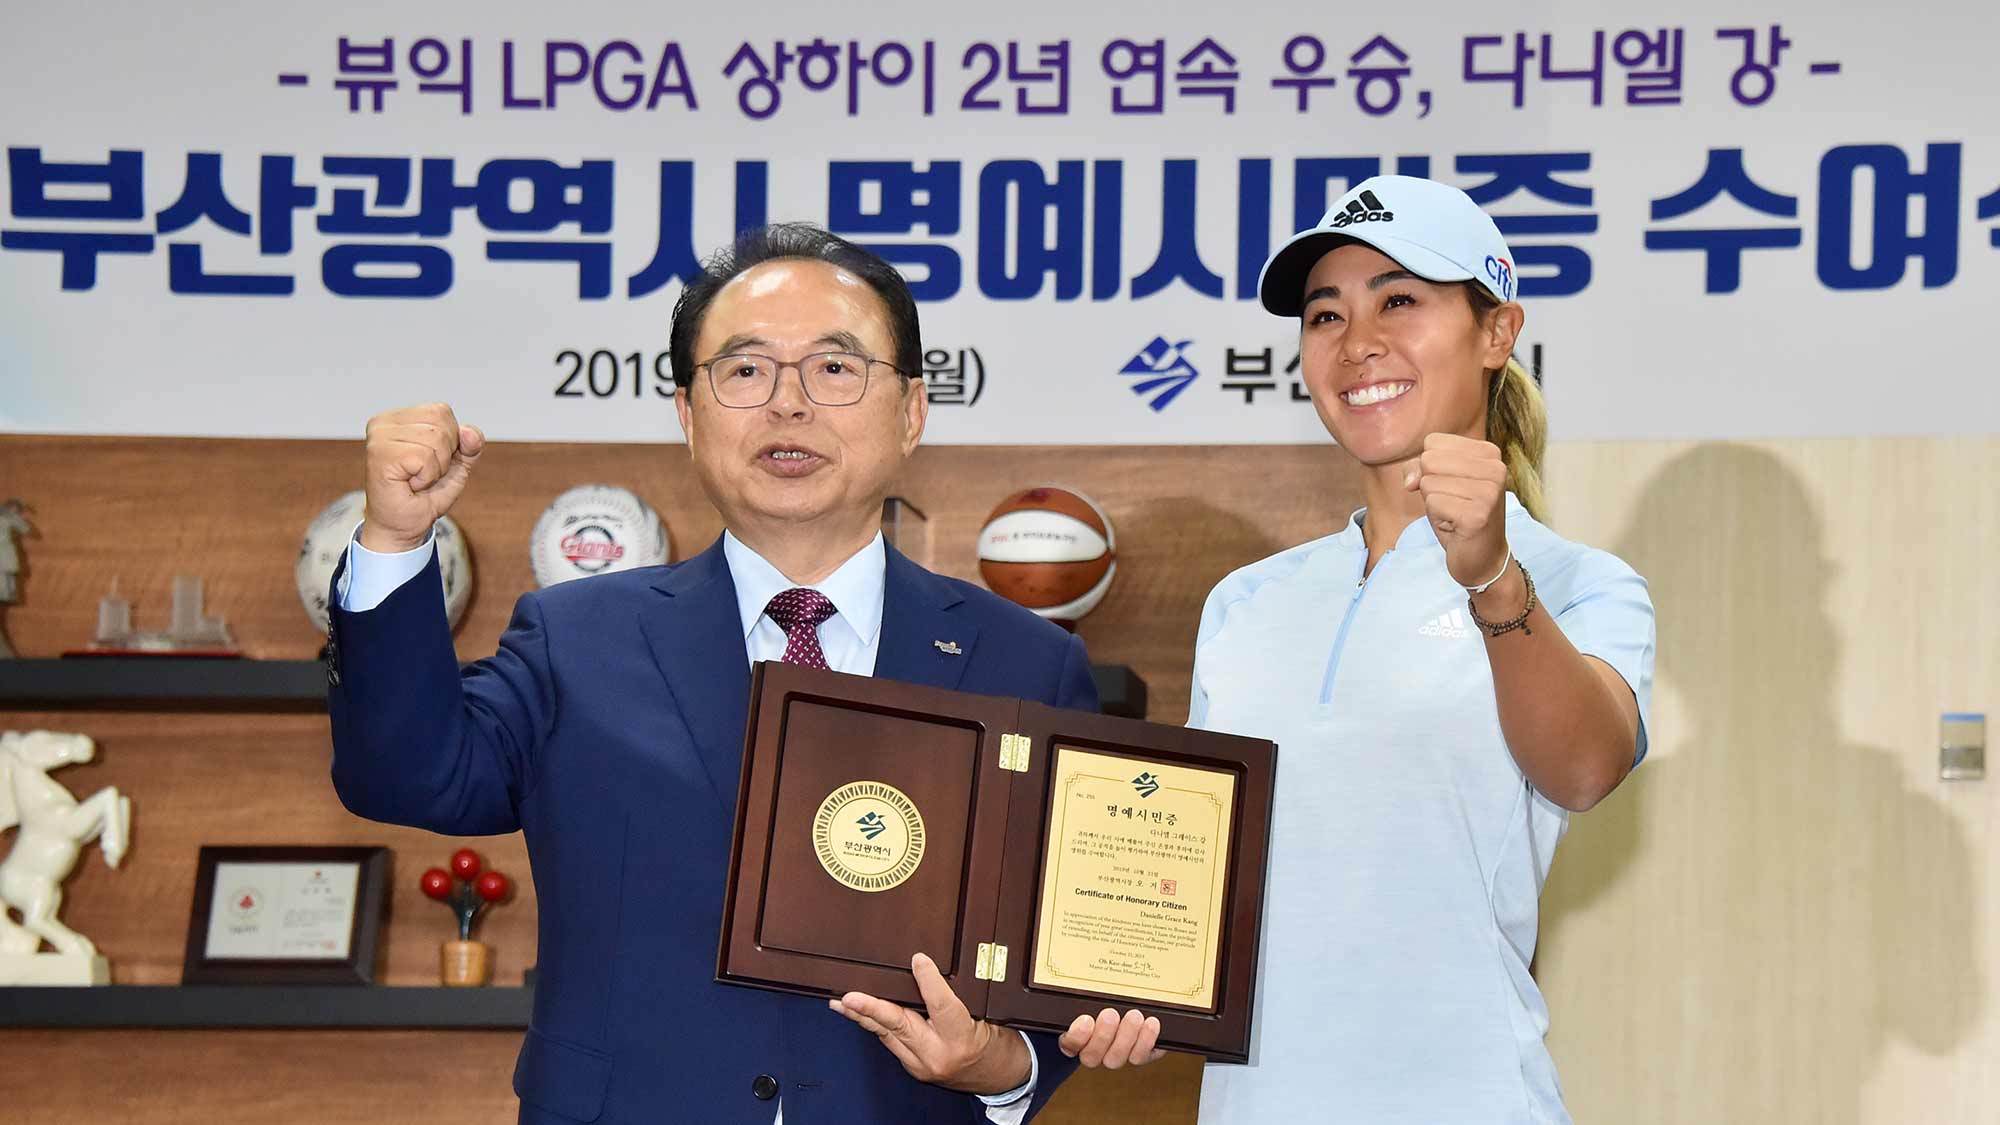 Danielle Kang receives honorary citizenship from the Busan Metropolitan City Mayor Keo-don Oh ahead of the 2019 BMW Ladies Championship in the Republic of Korea